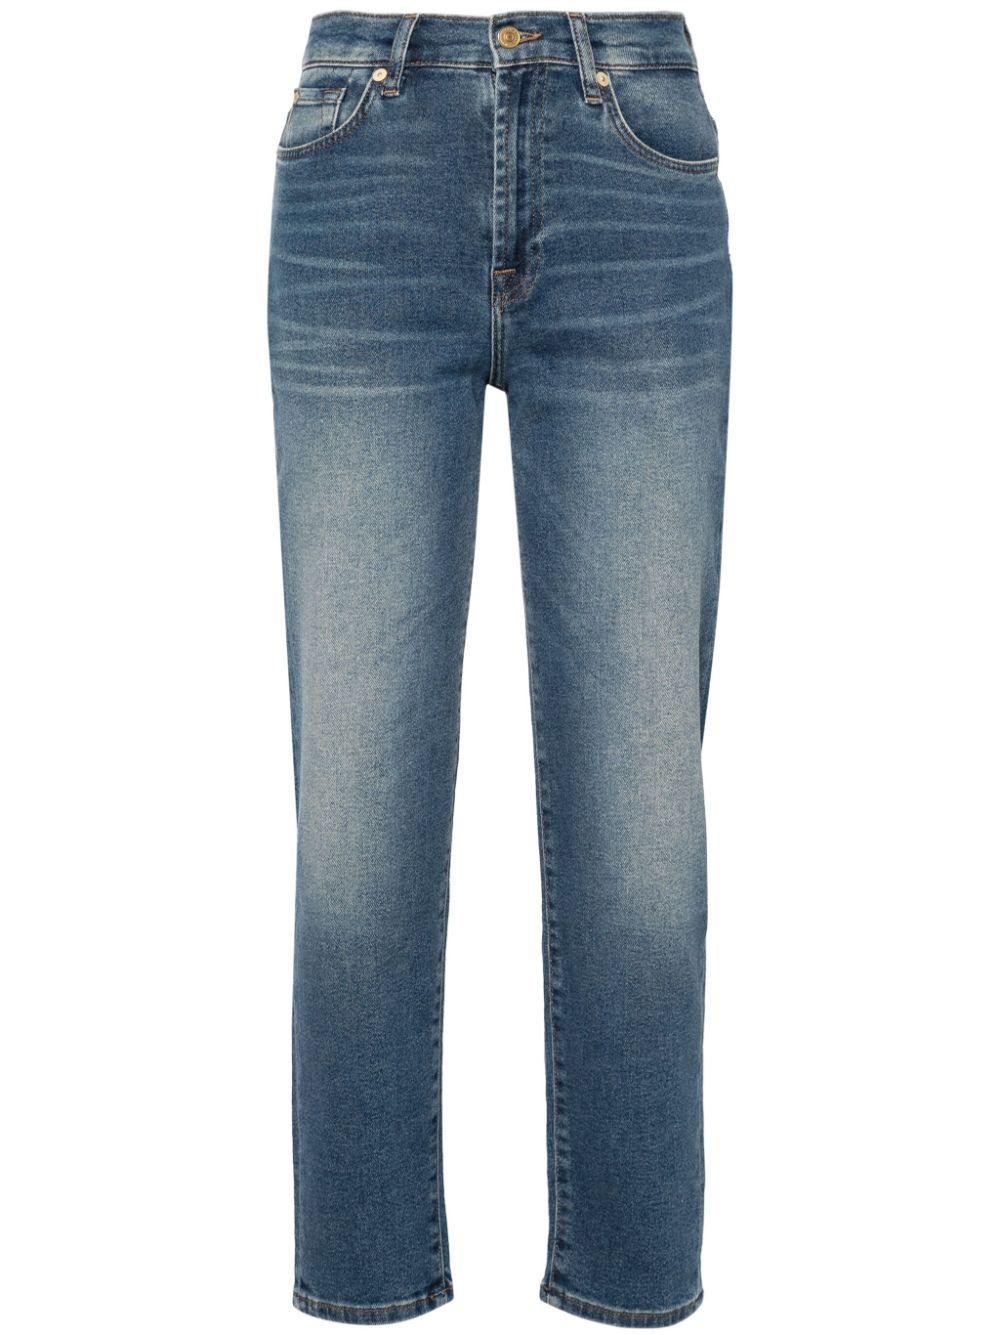 7 For All Mankind Malia high-rise tapered jeans - Blue von 7 For All Mankind